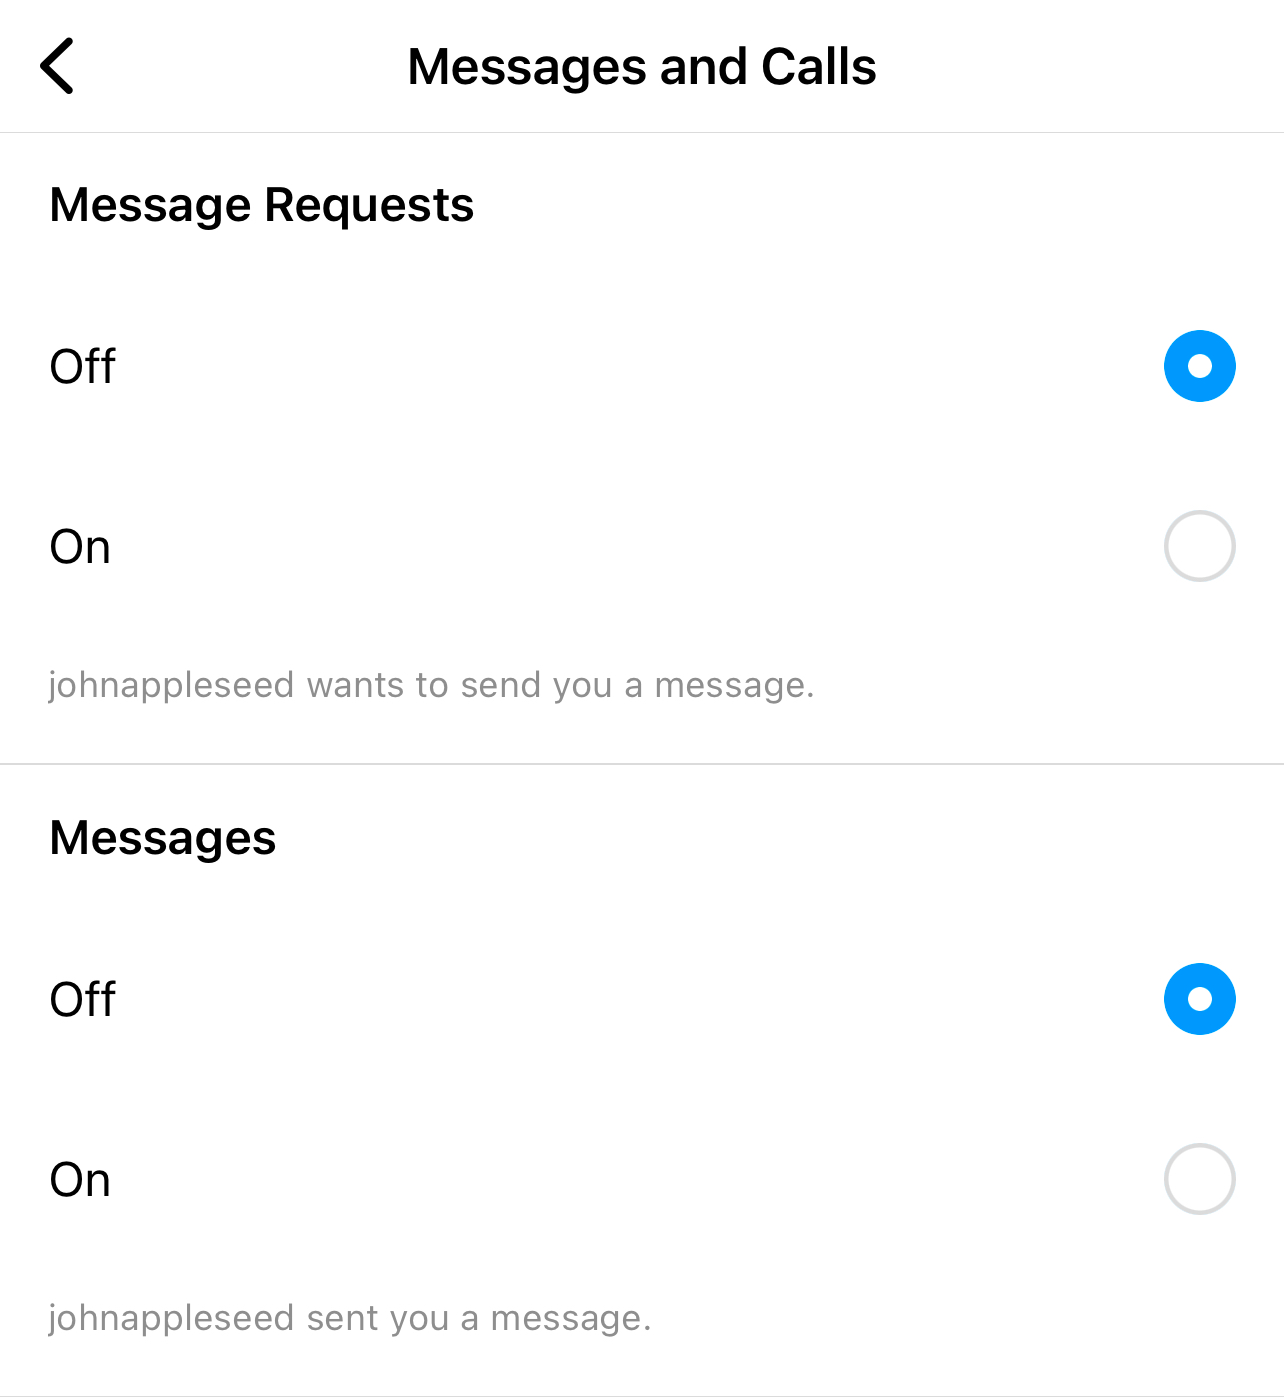 toggle messages requests and messages